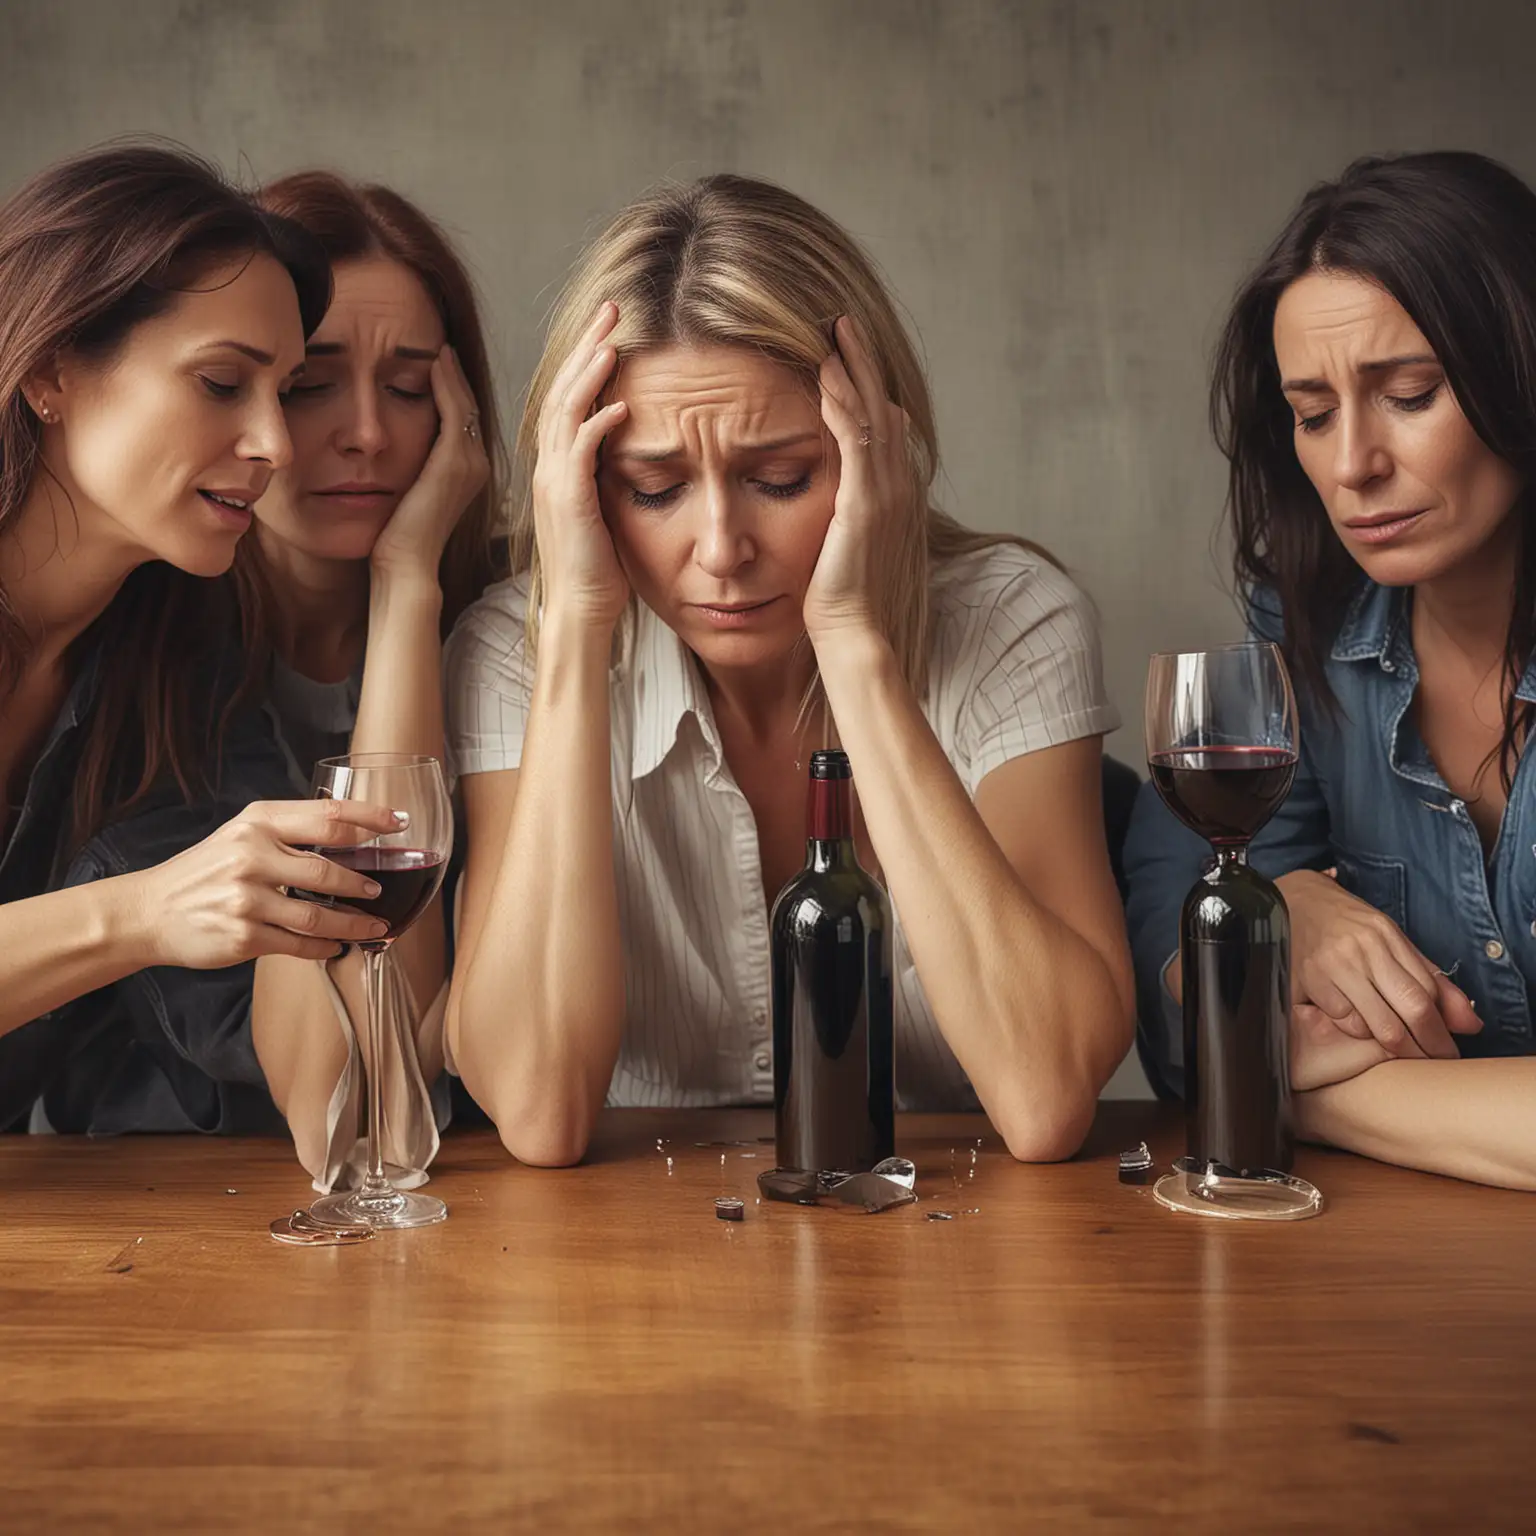 Create an image of a 45 year old woman broken and depressed with her friends drinking wine